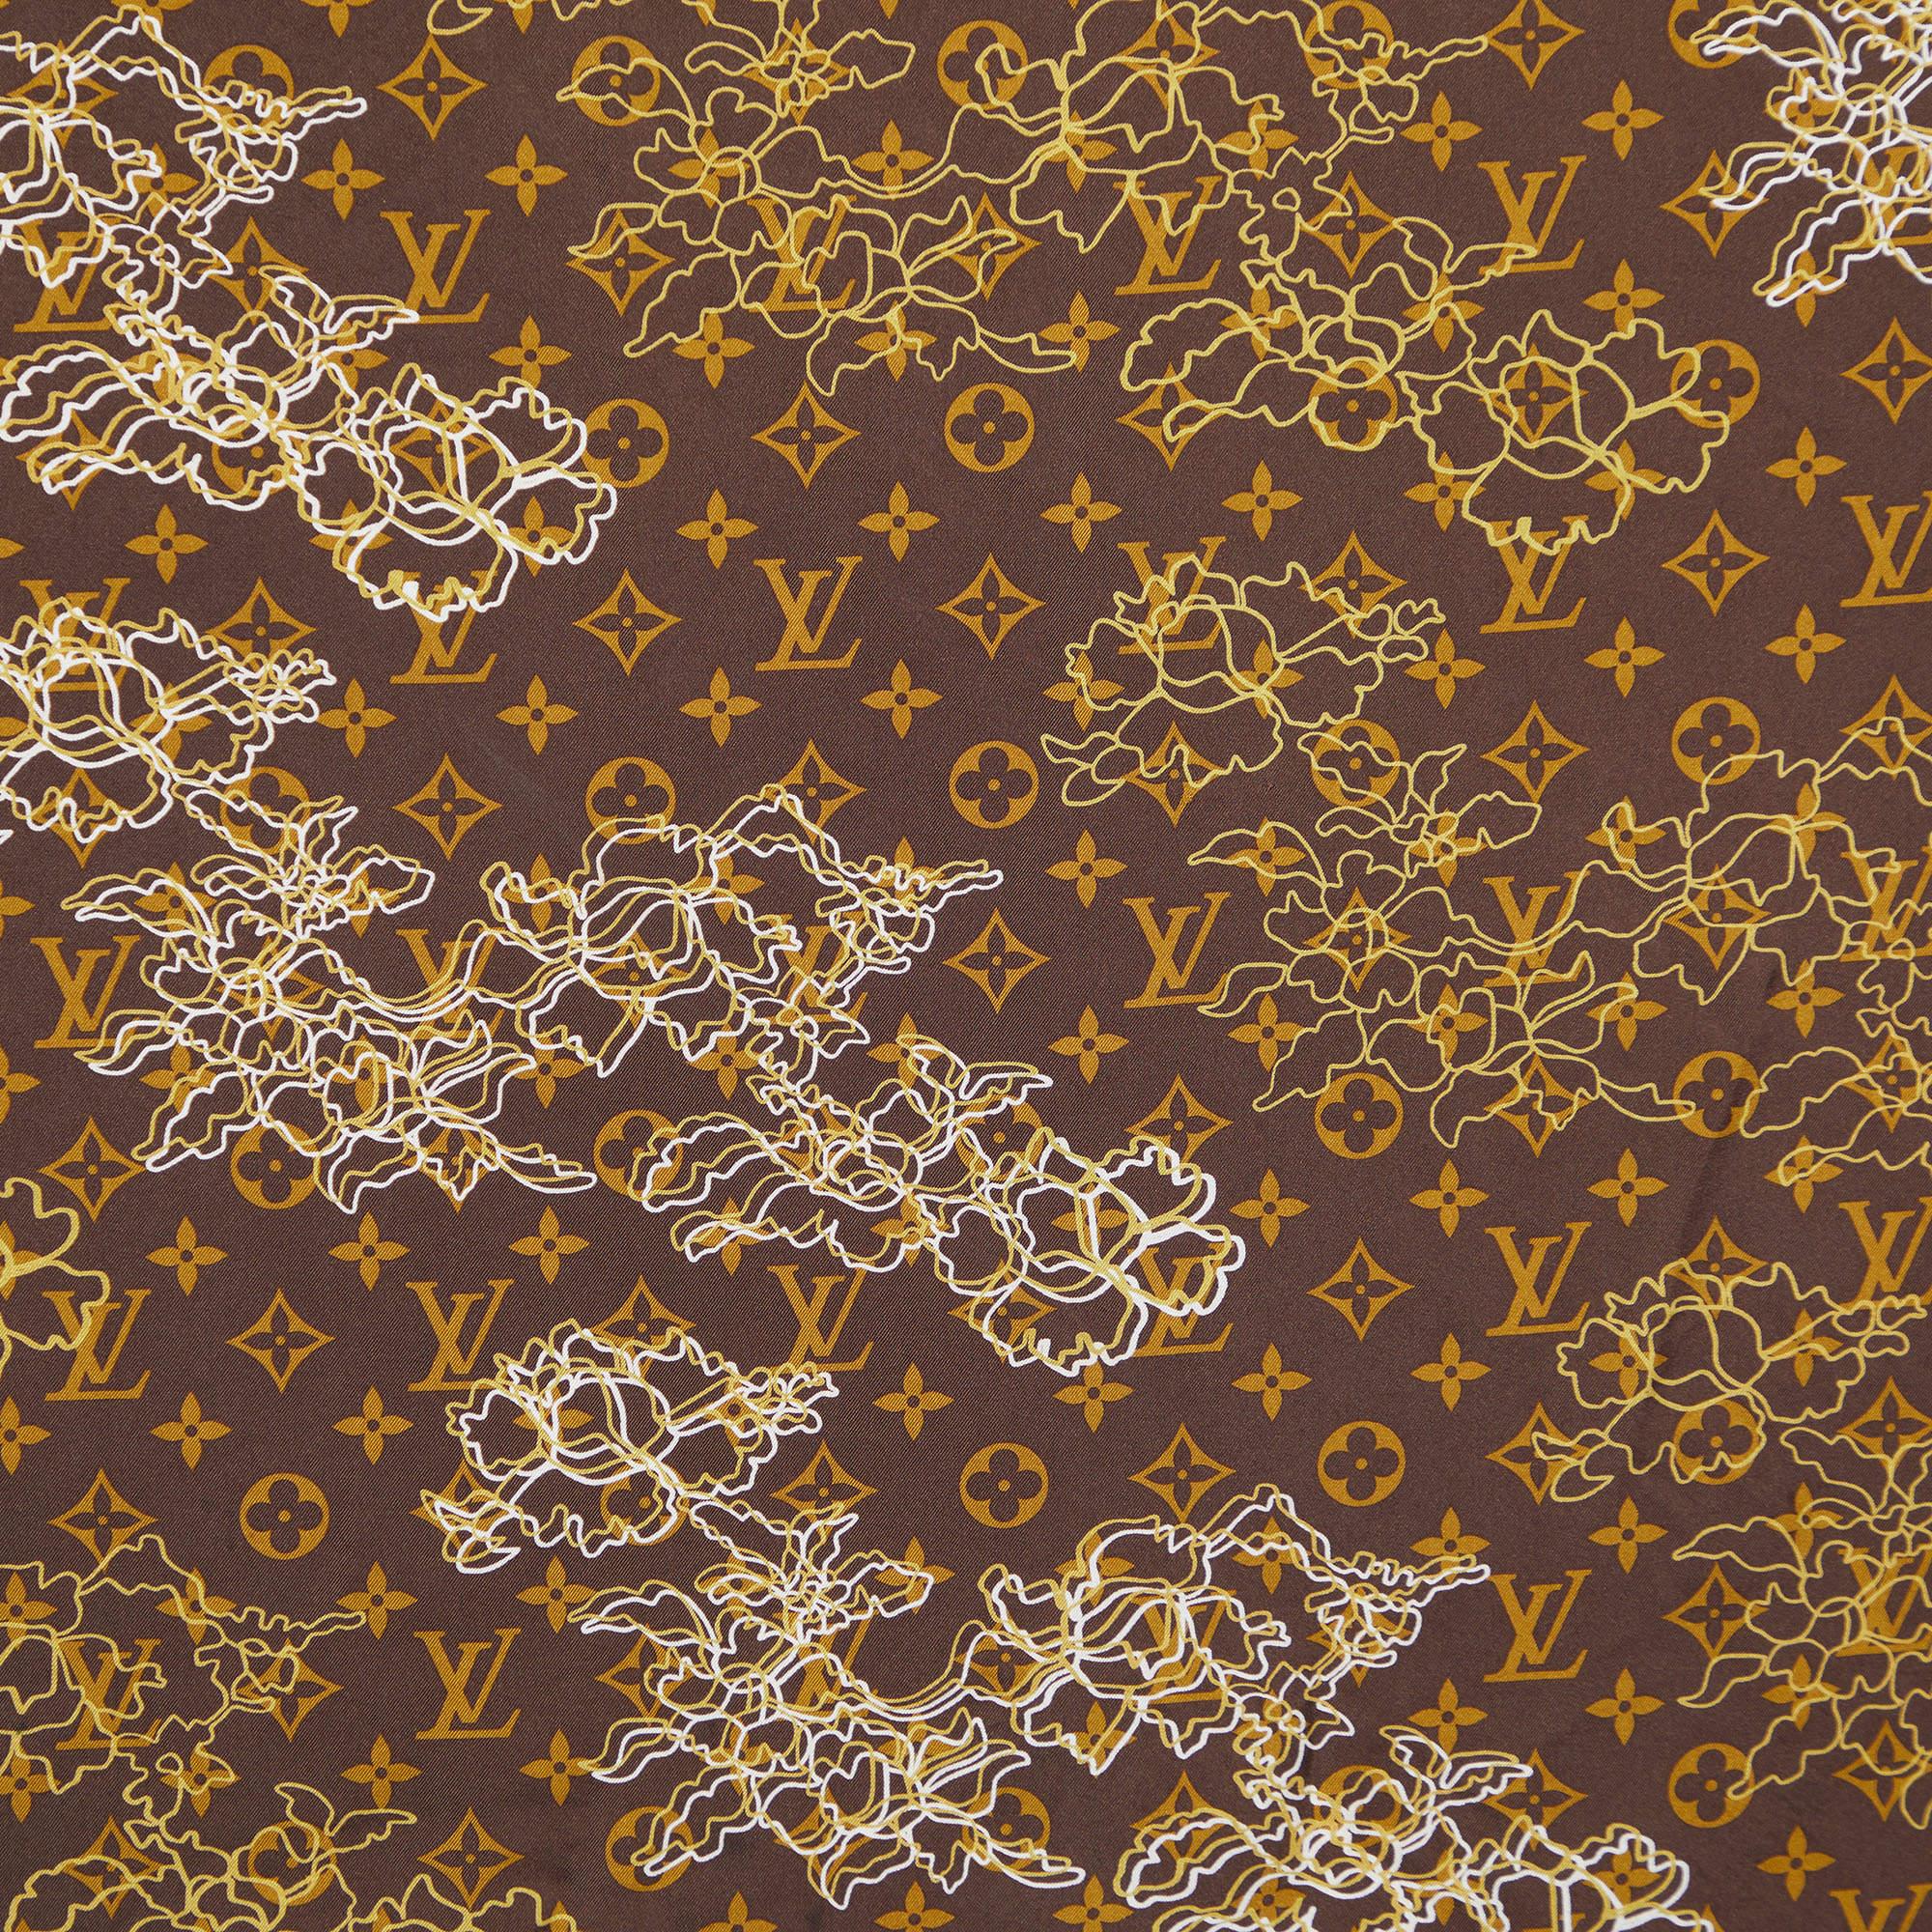 Made from luxurious silk, this Louis Vuitton Dentelle scarf keeps you fashionable. Pattered with the monogram, this brown scarf from the Dentelle collection is an easy drape.

